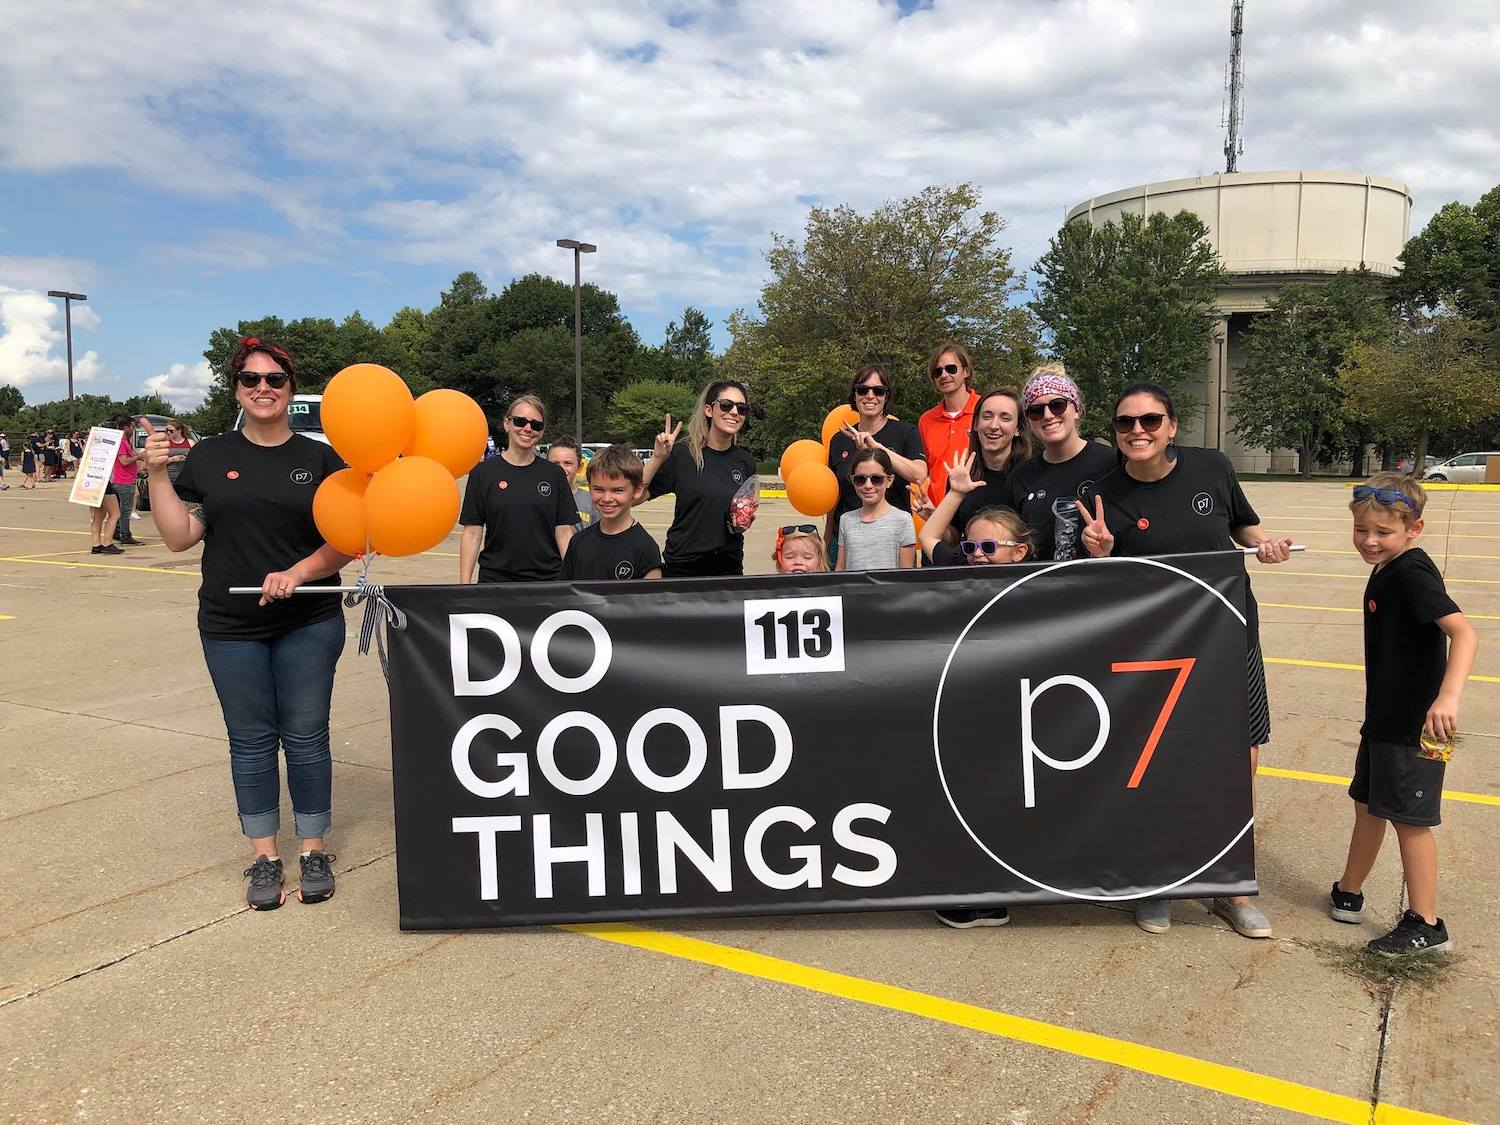 p7 team in a parade holding DO GOOD THINGS banner